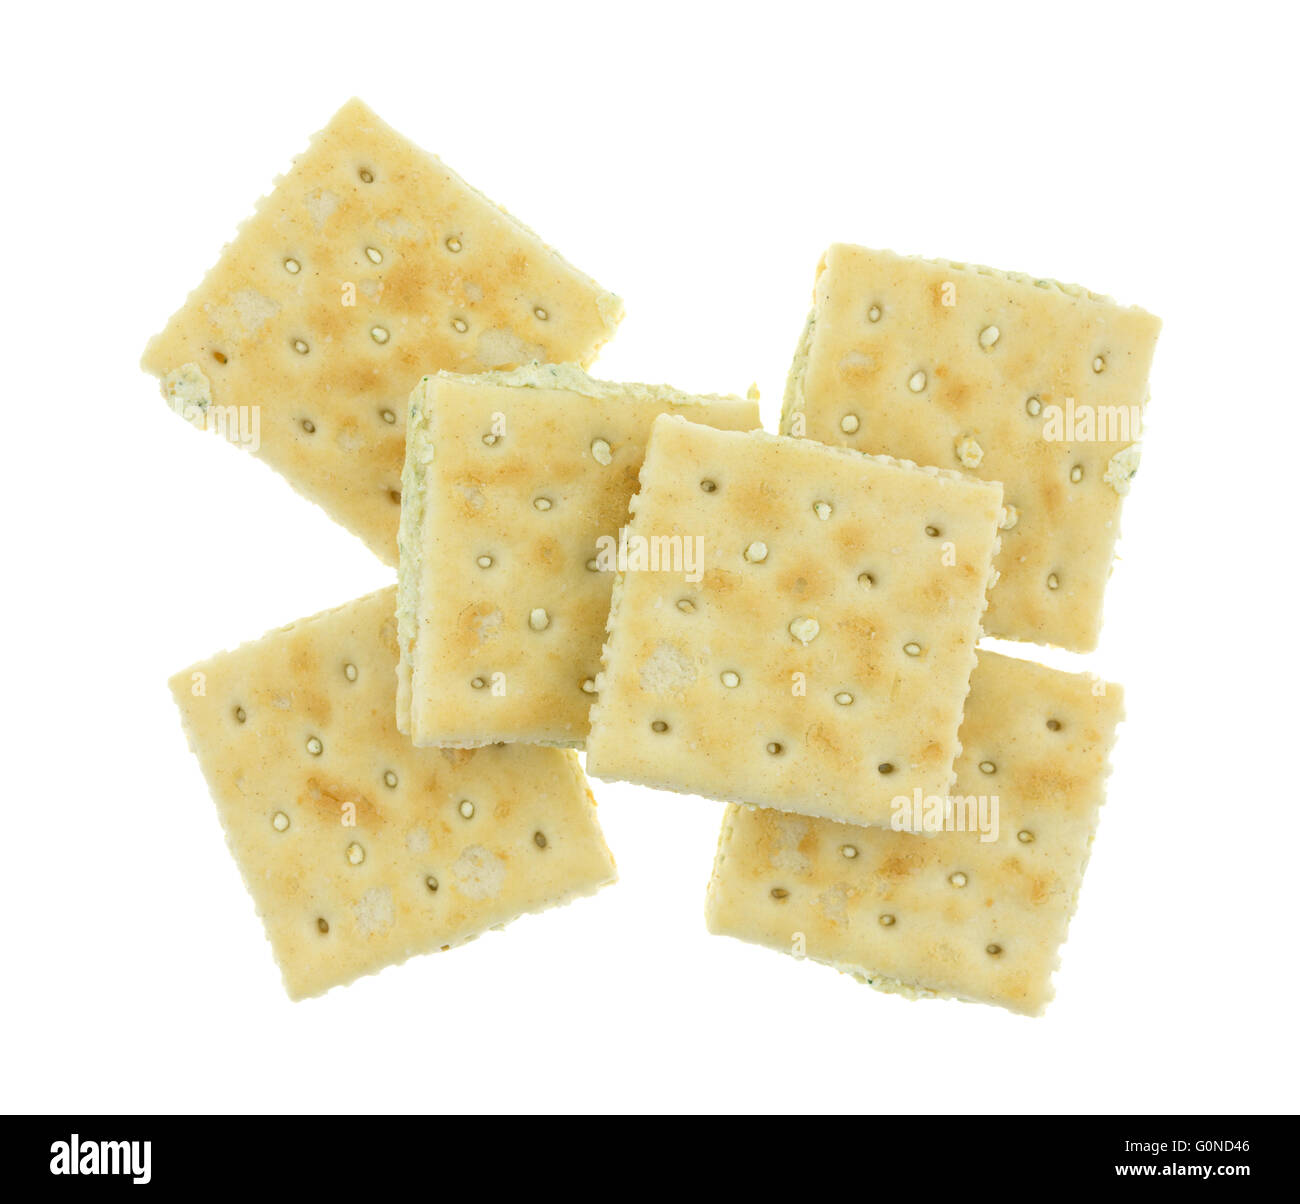 Top view of several cream cheese and chives crackers isolated on a white background. Stock Photo